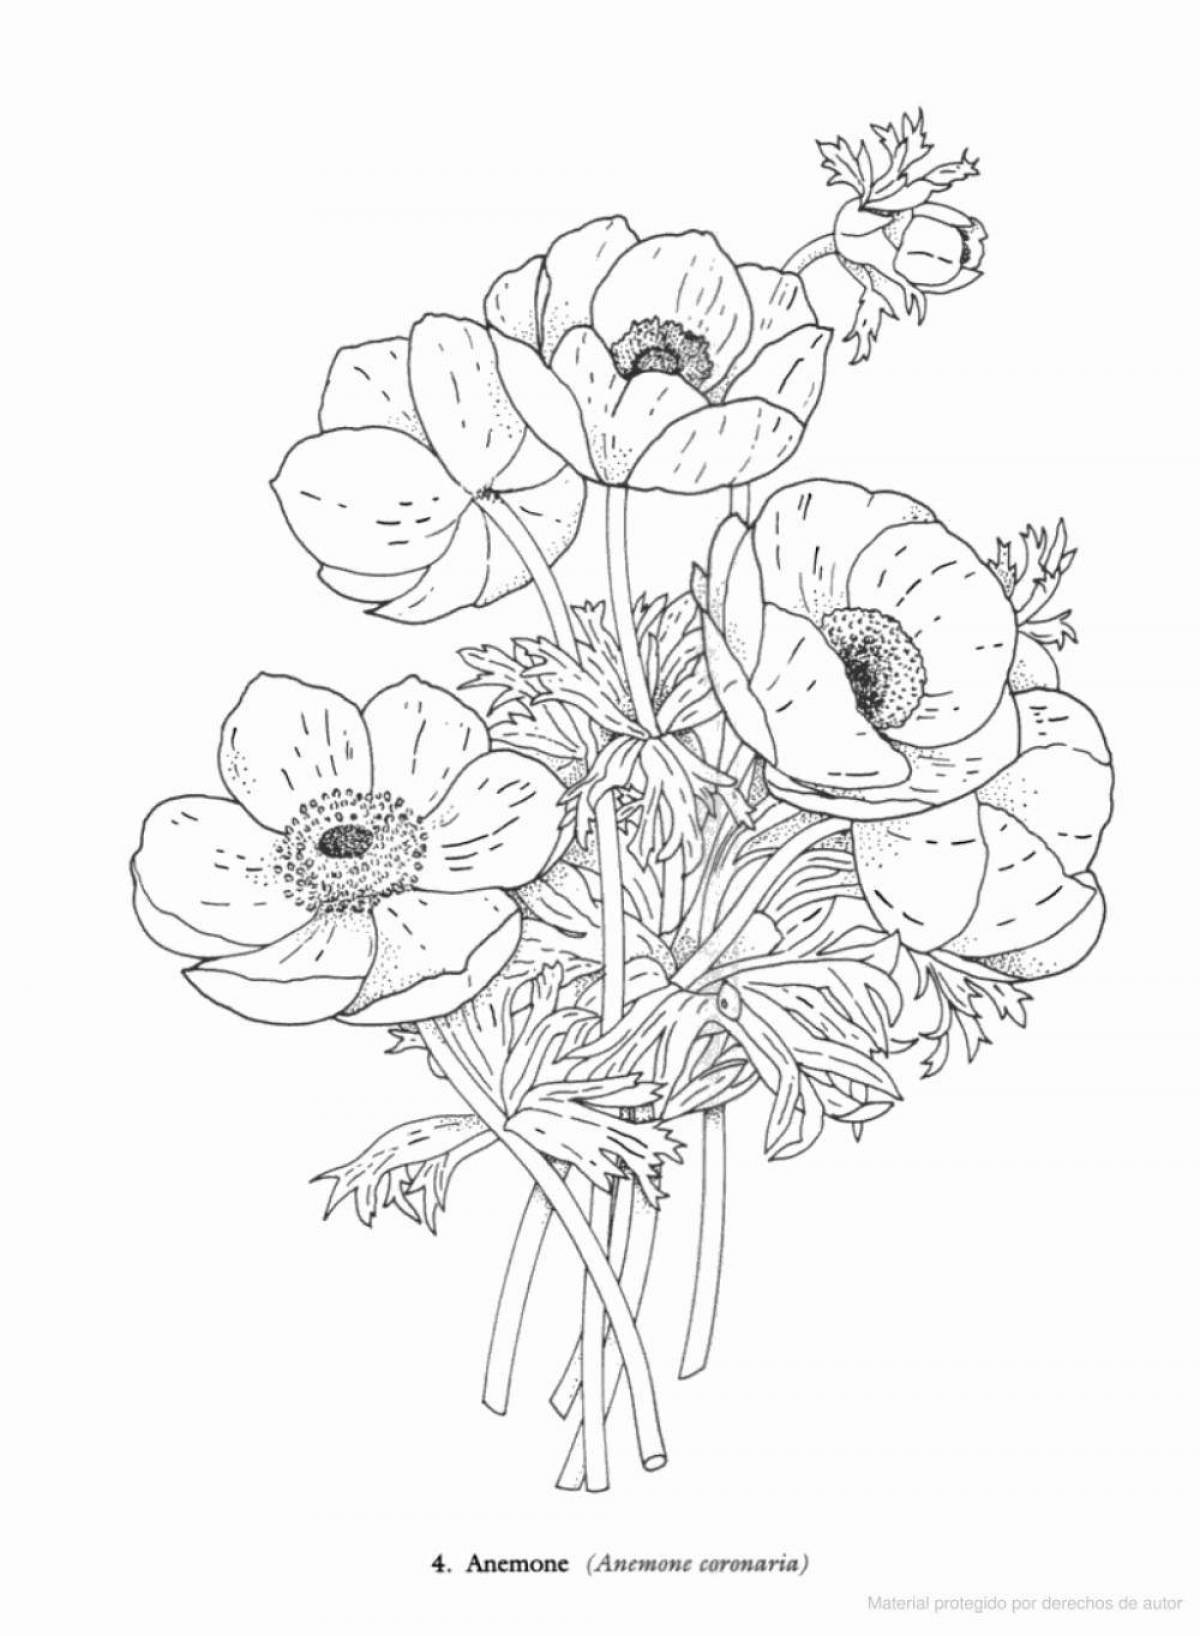 Colorful botany coloring page